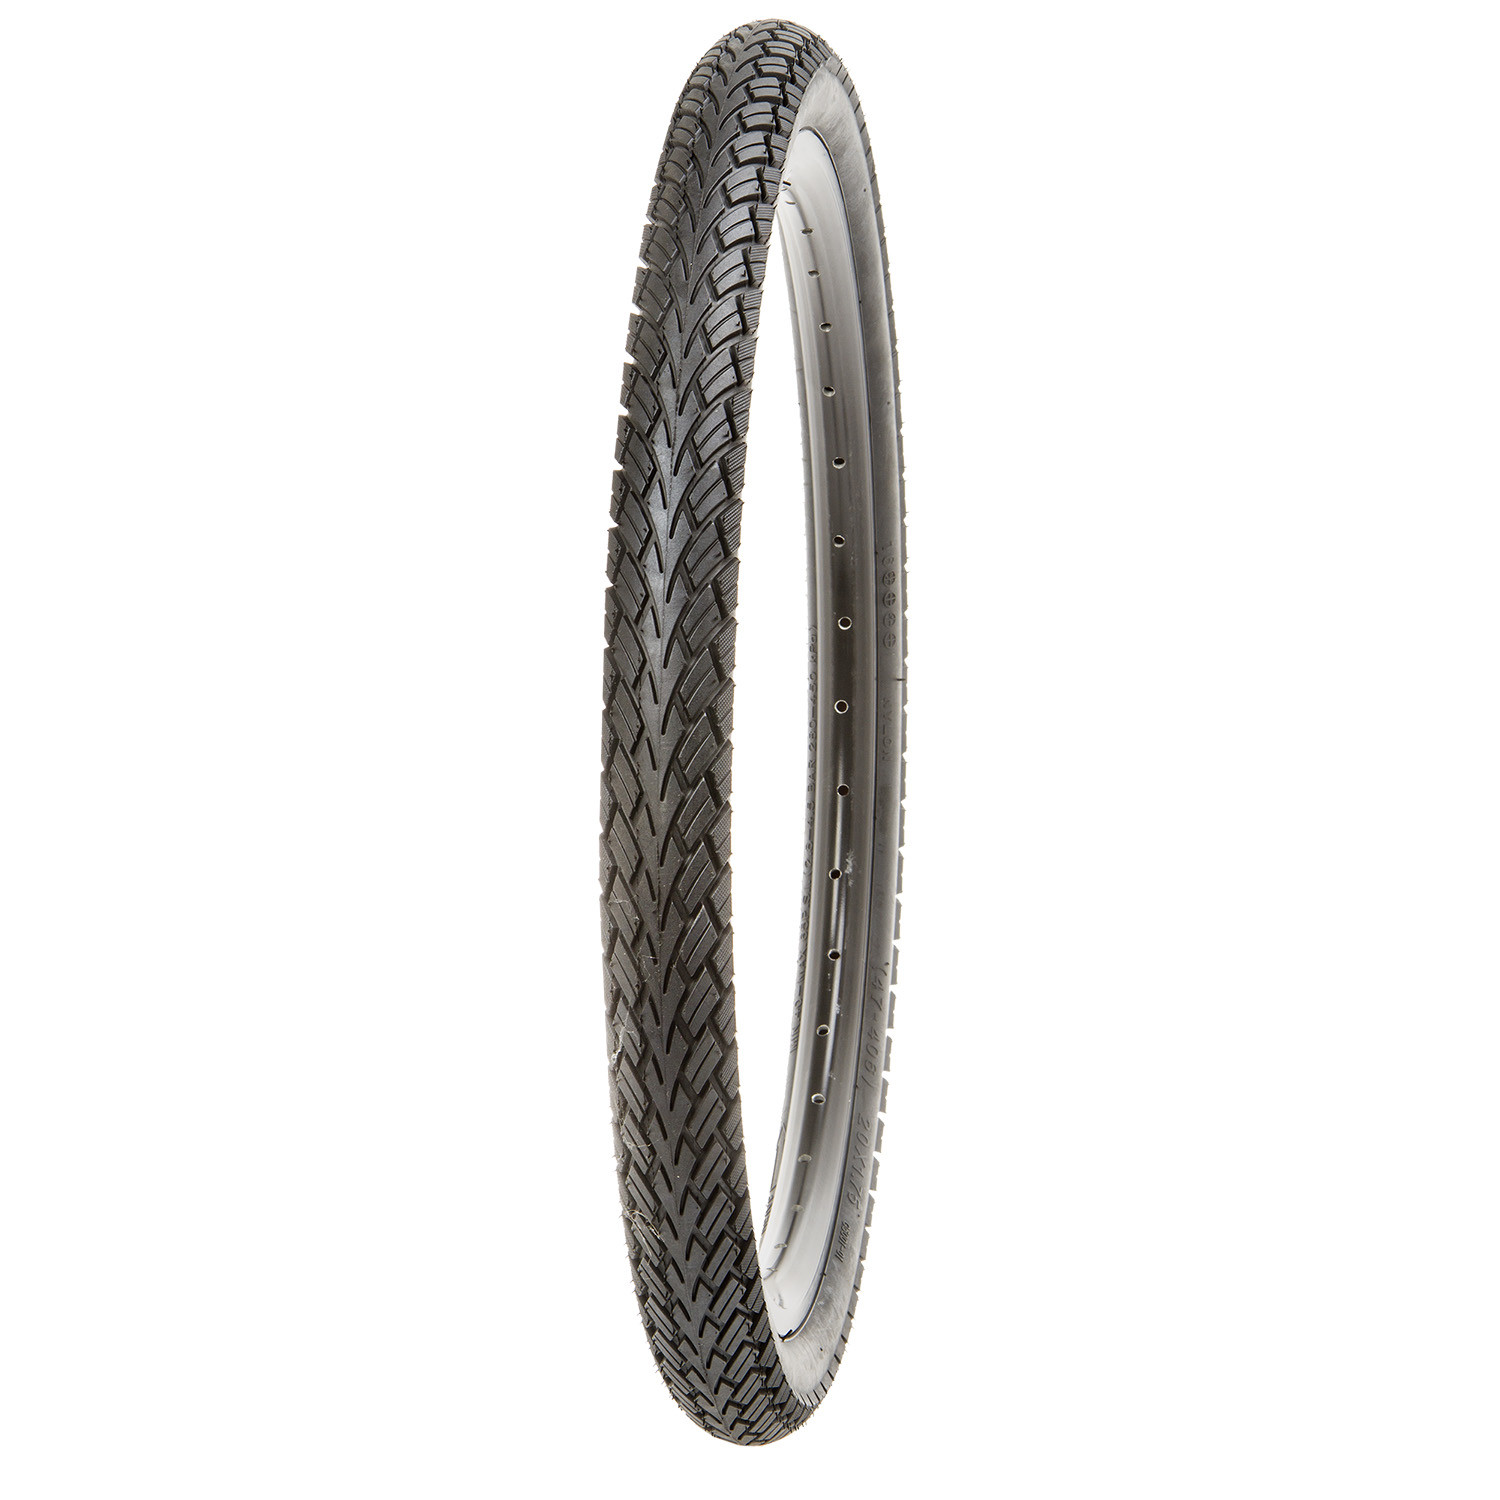 558131 – KUJO One 0 One A 14 x 1.75″ Clincher – AVAILABLE IN SELECTED BIKE SHOPS